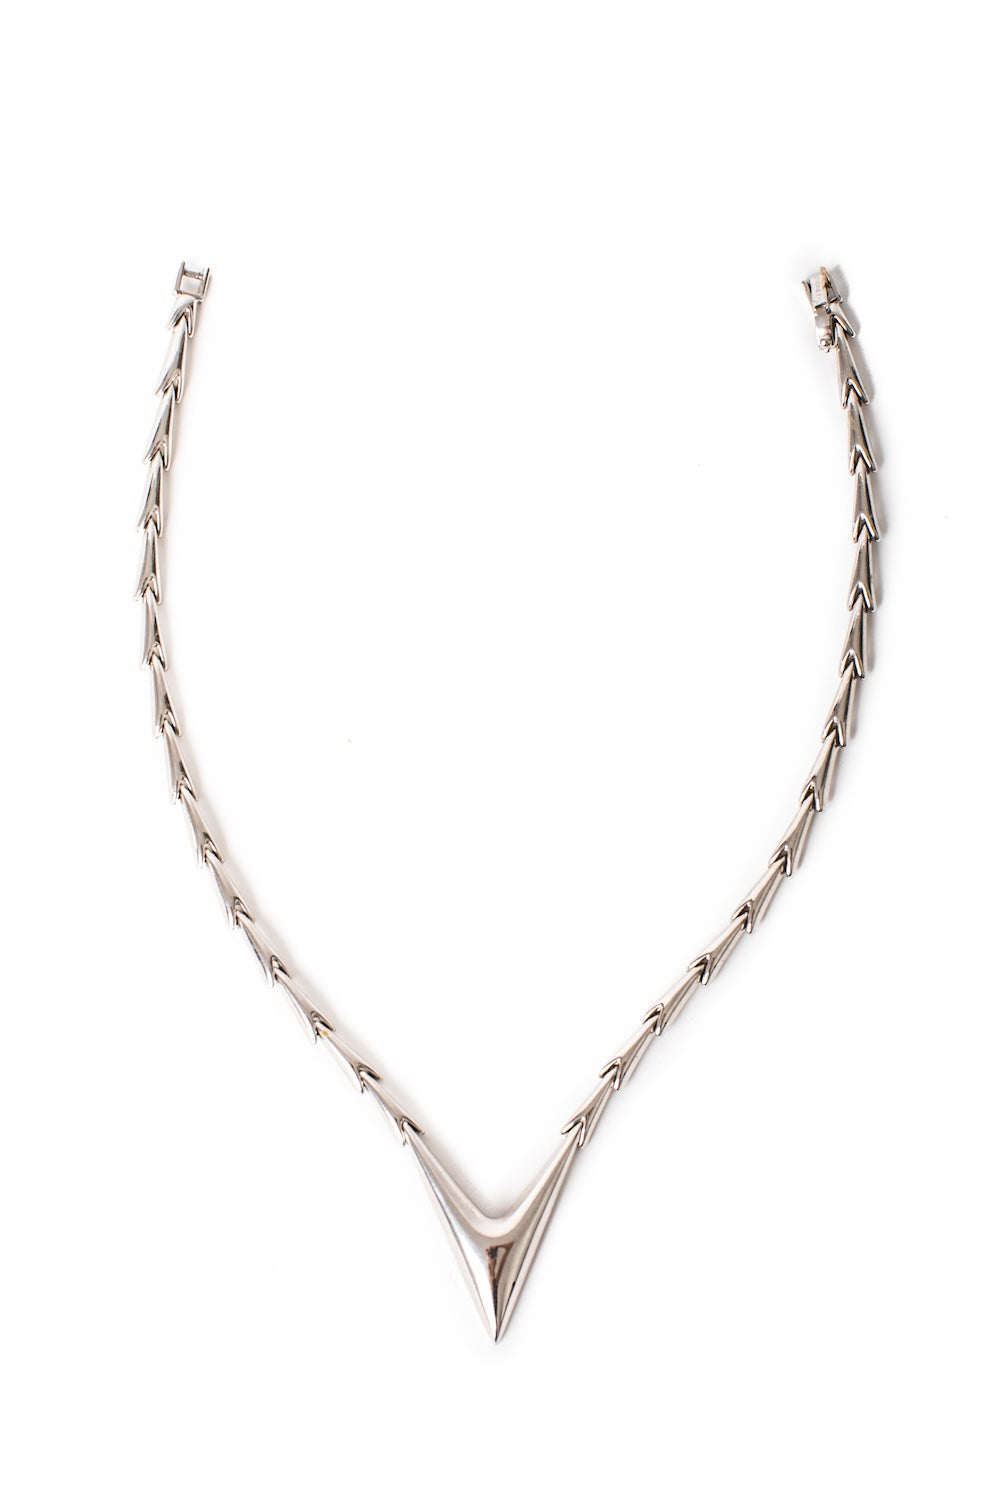 Monet <br> 80's silver V-shaped segment link chain choker necklace